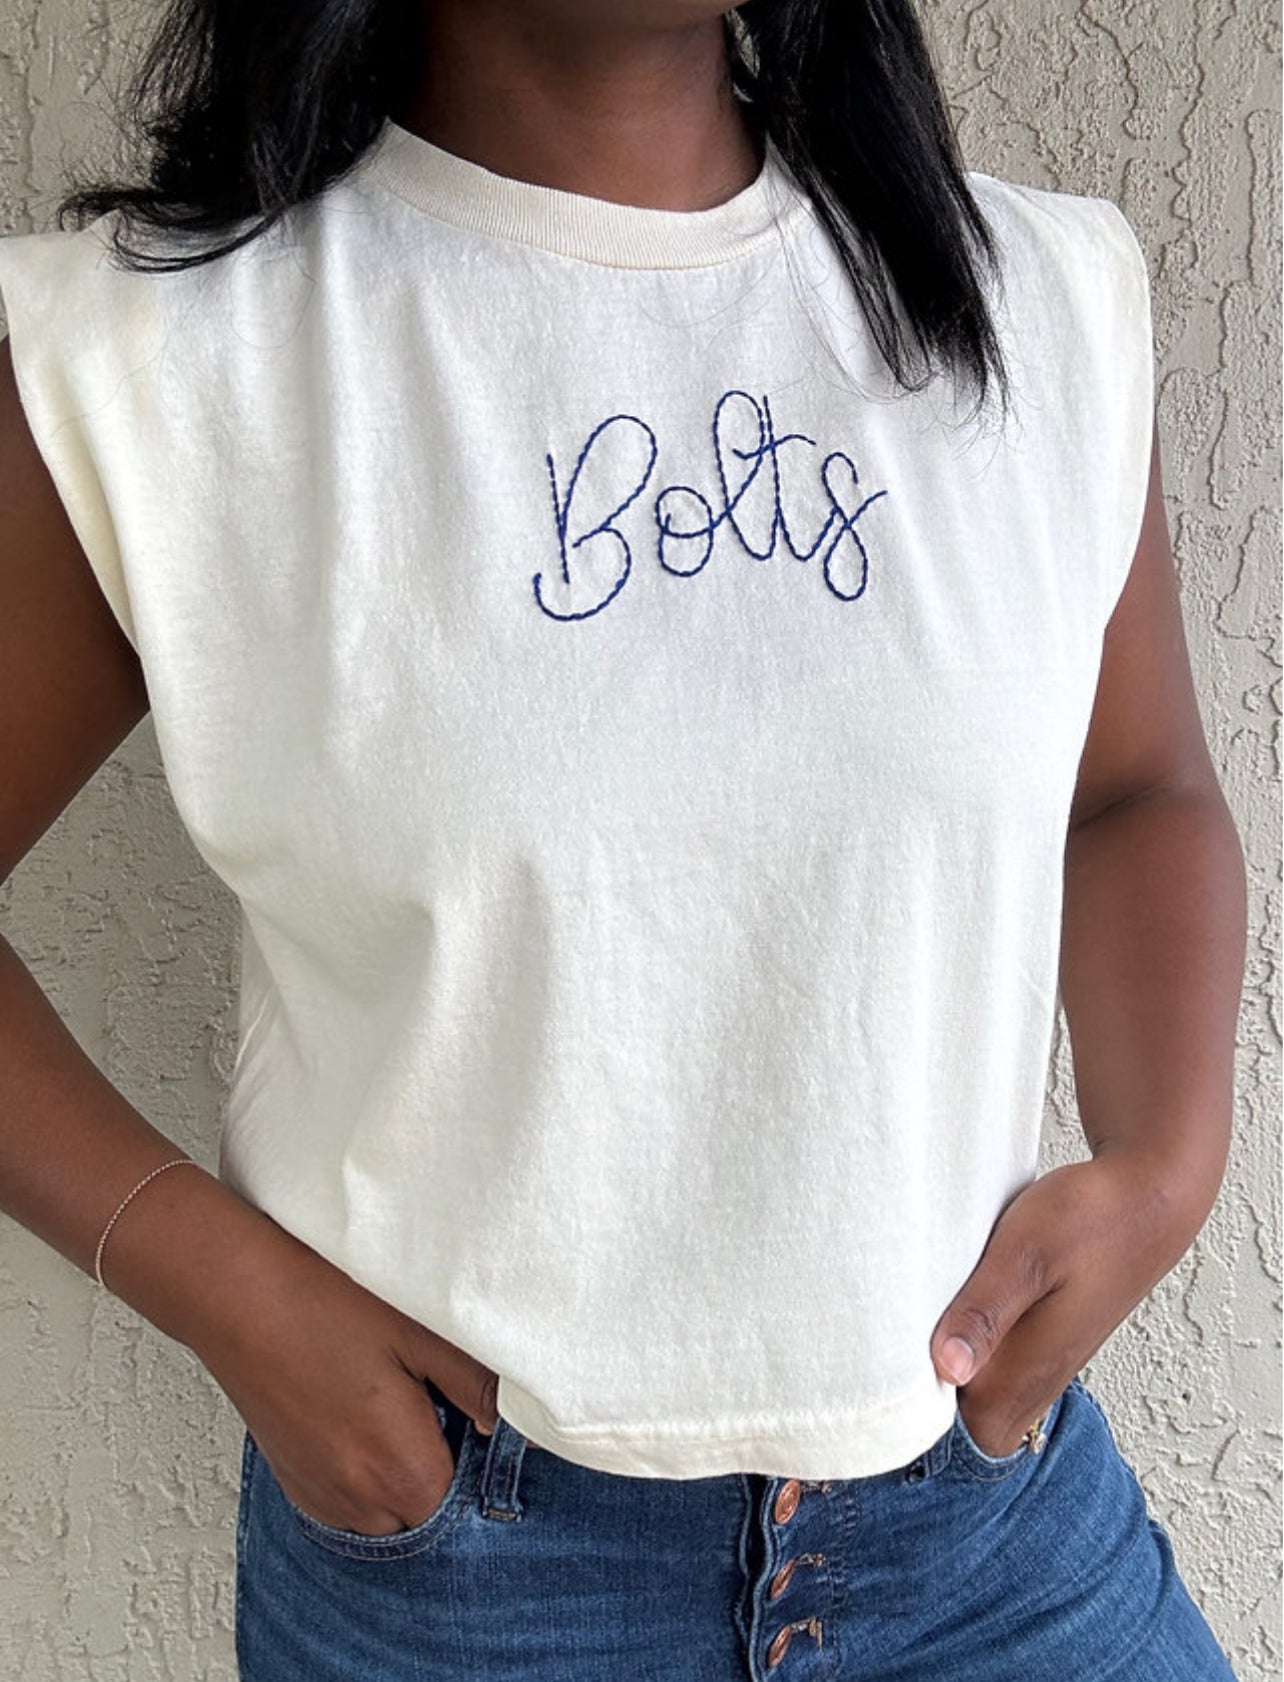 Bolts Hand Embroidered Muscle Tee